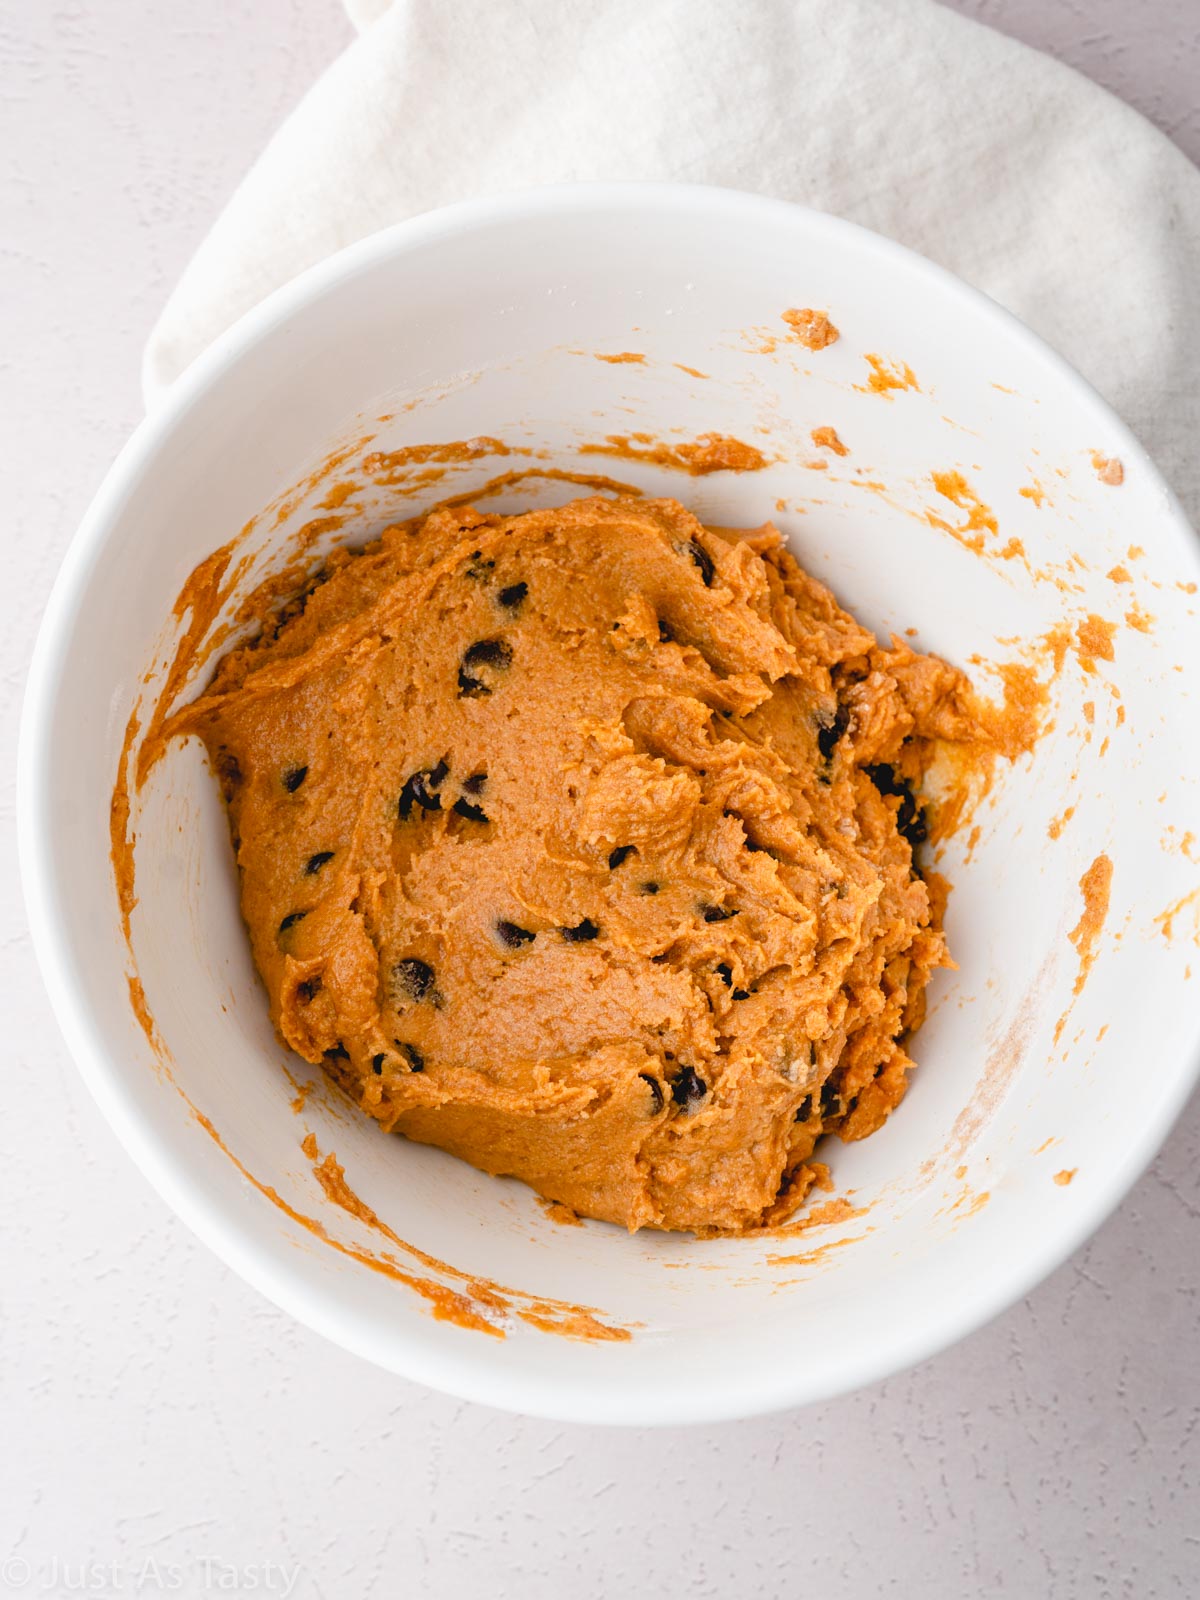 Pumpkin bread batter with chocolate chips in a bowl.